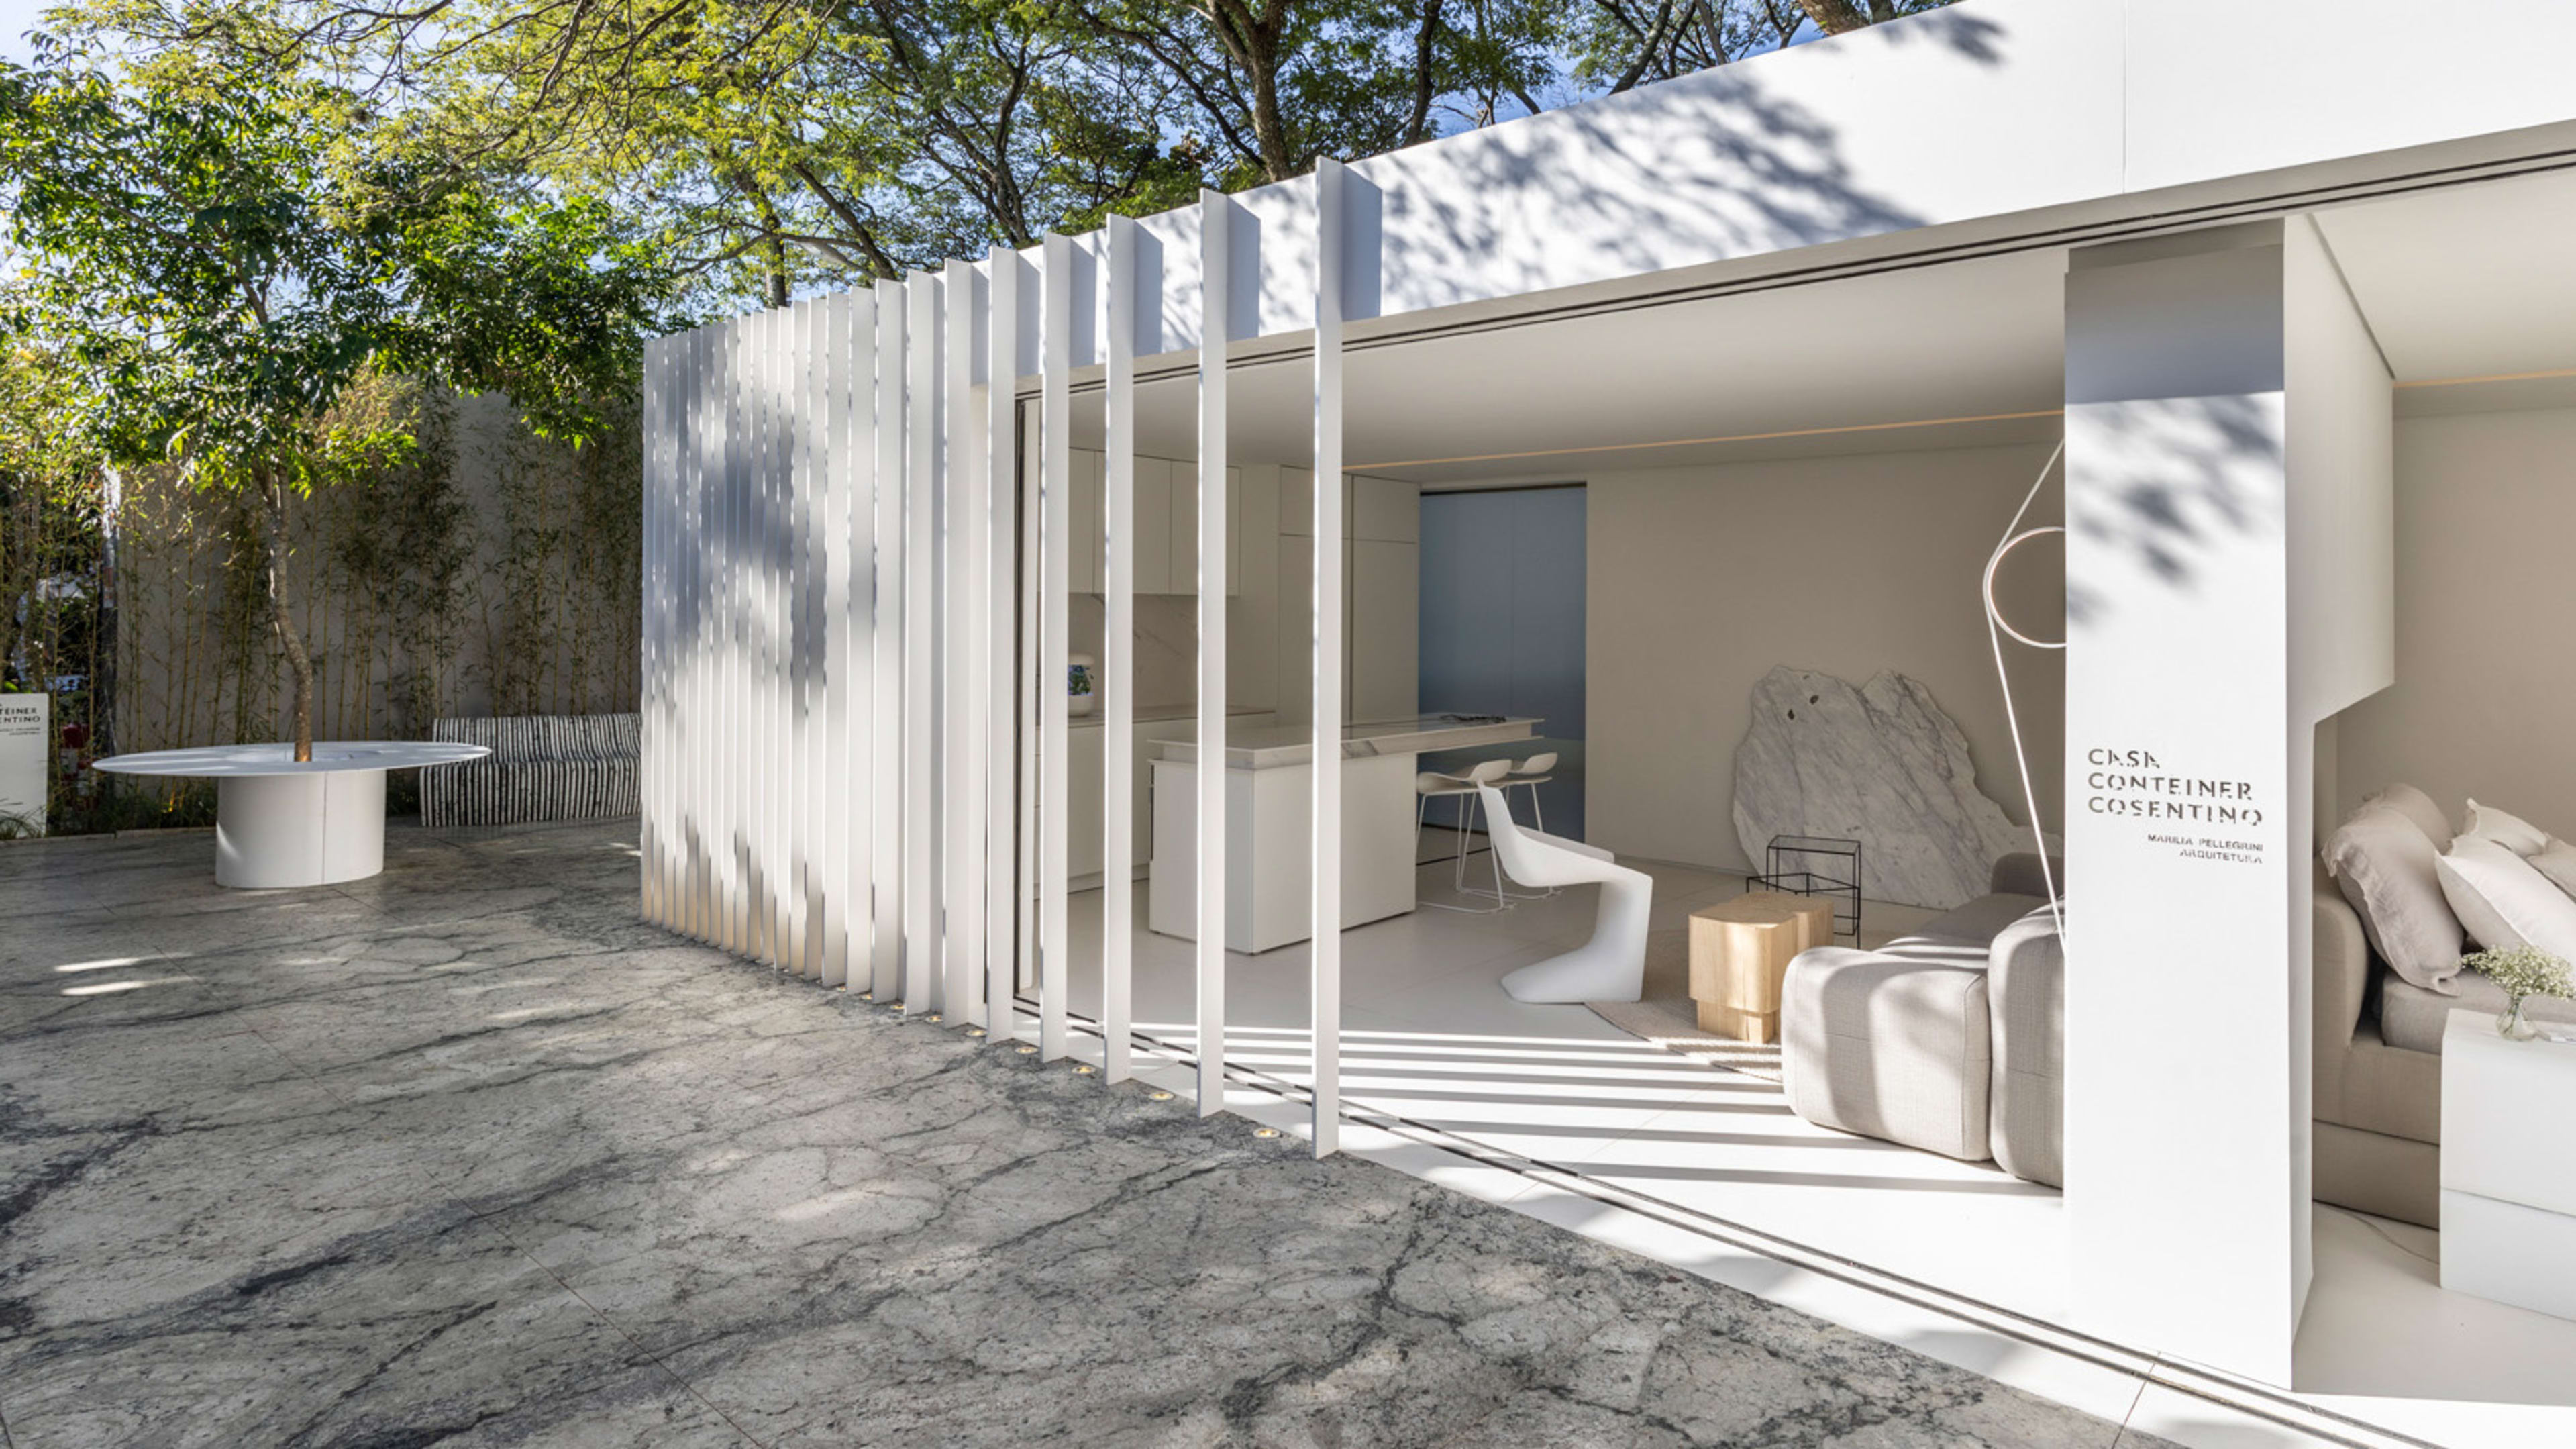 The humble shipping container home gets a luxurious upgrade